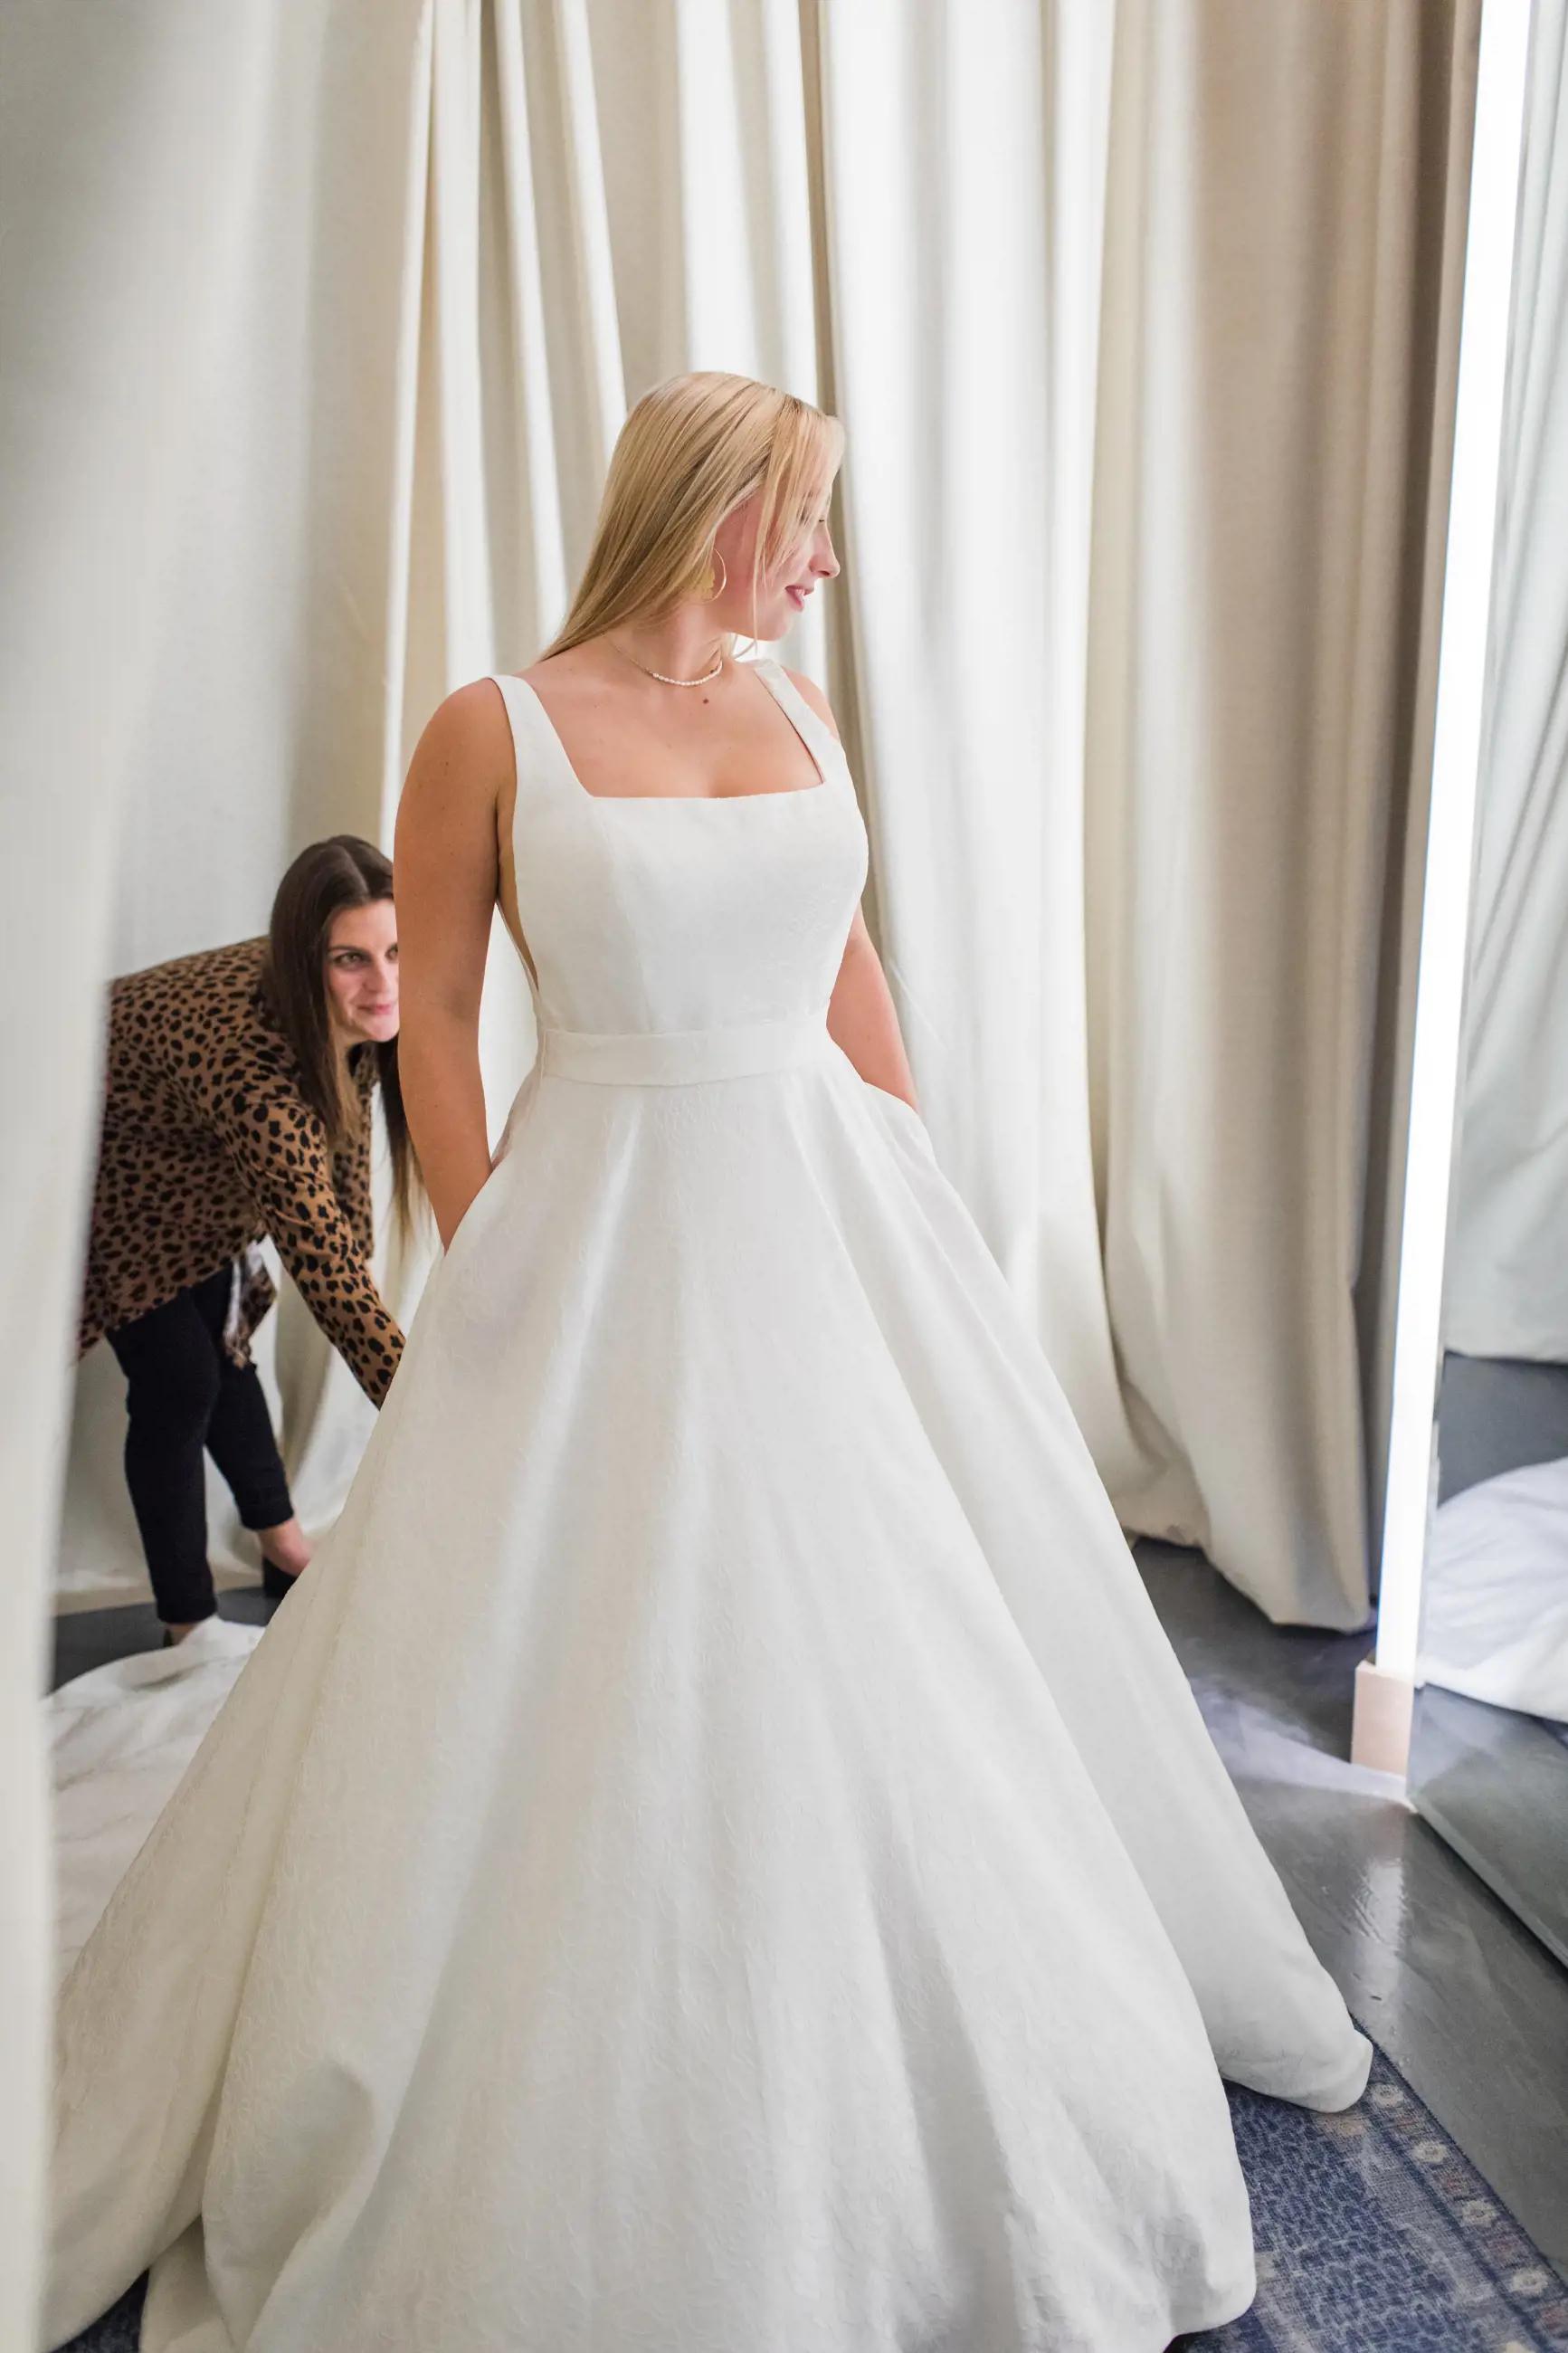 5 Dress Shopping Tips from a Pro Image